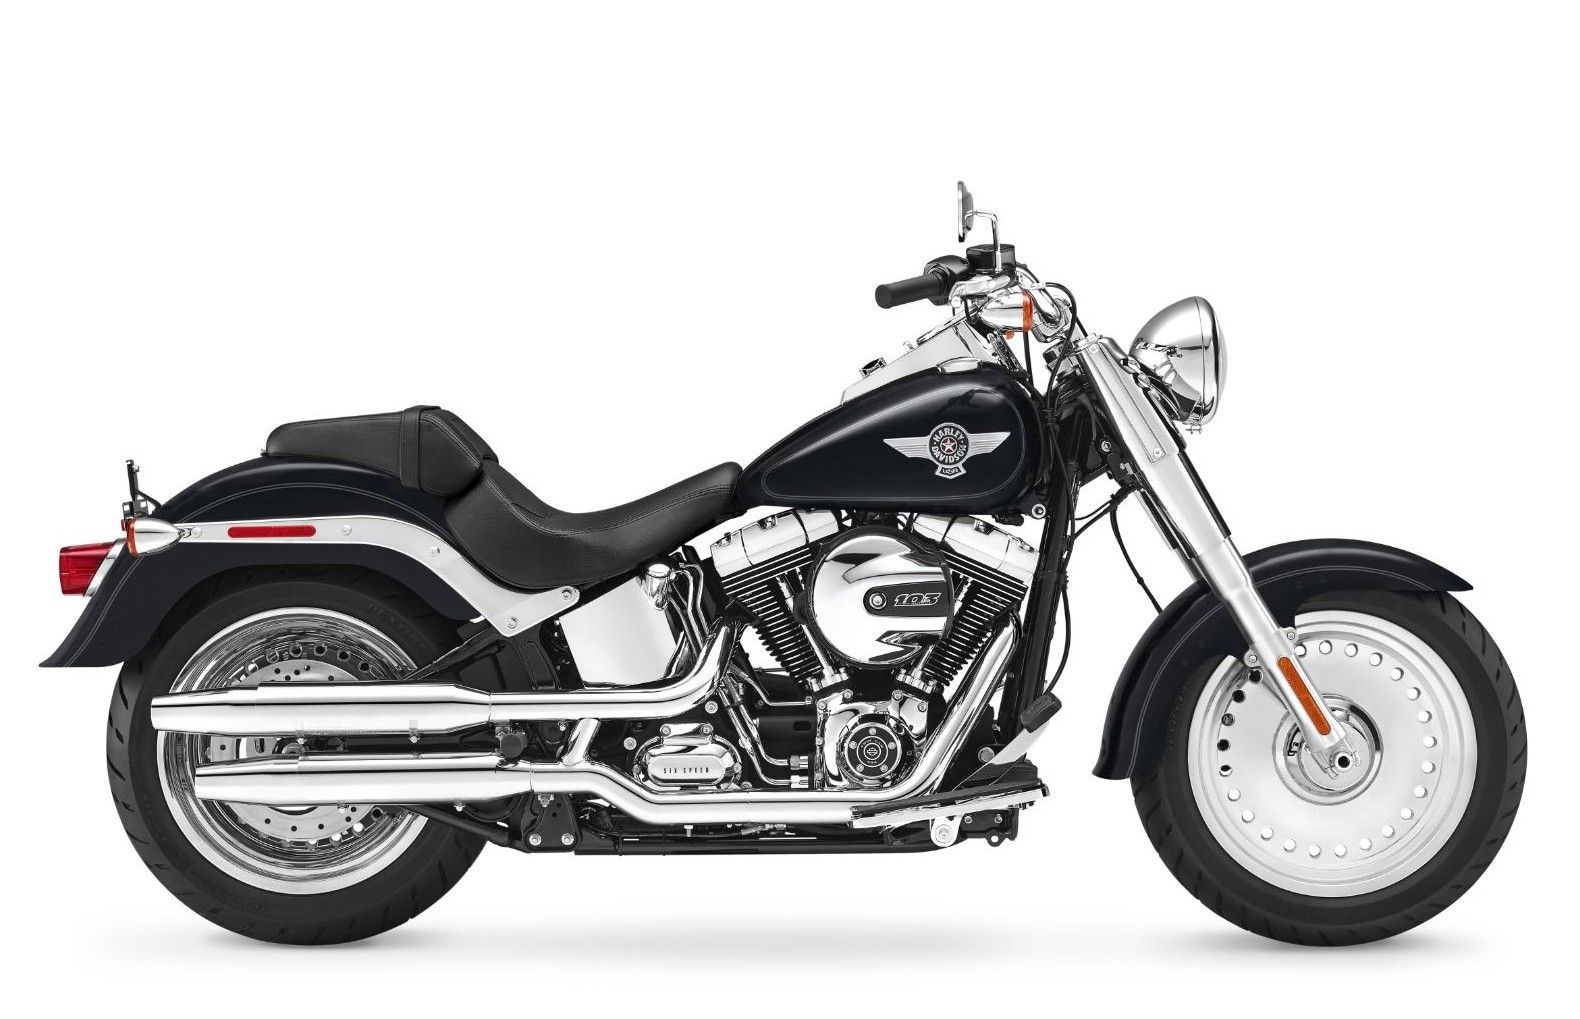 Harley-Davidson Drops Prices For Fat Boy, Heritage Softail Classic